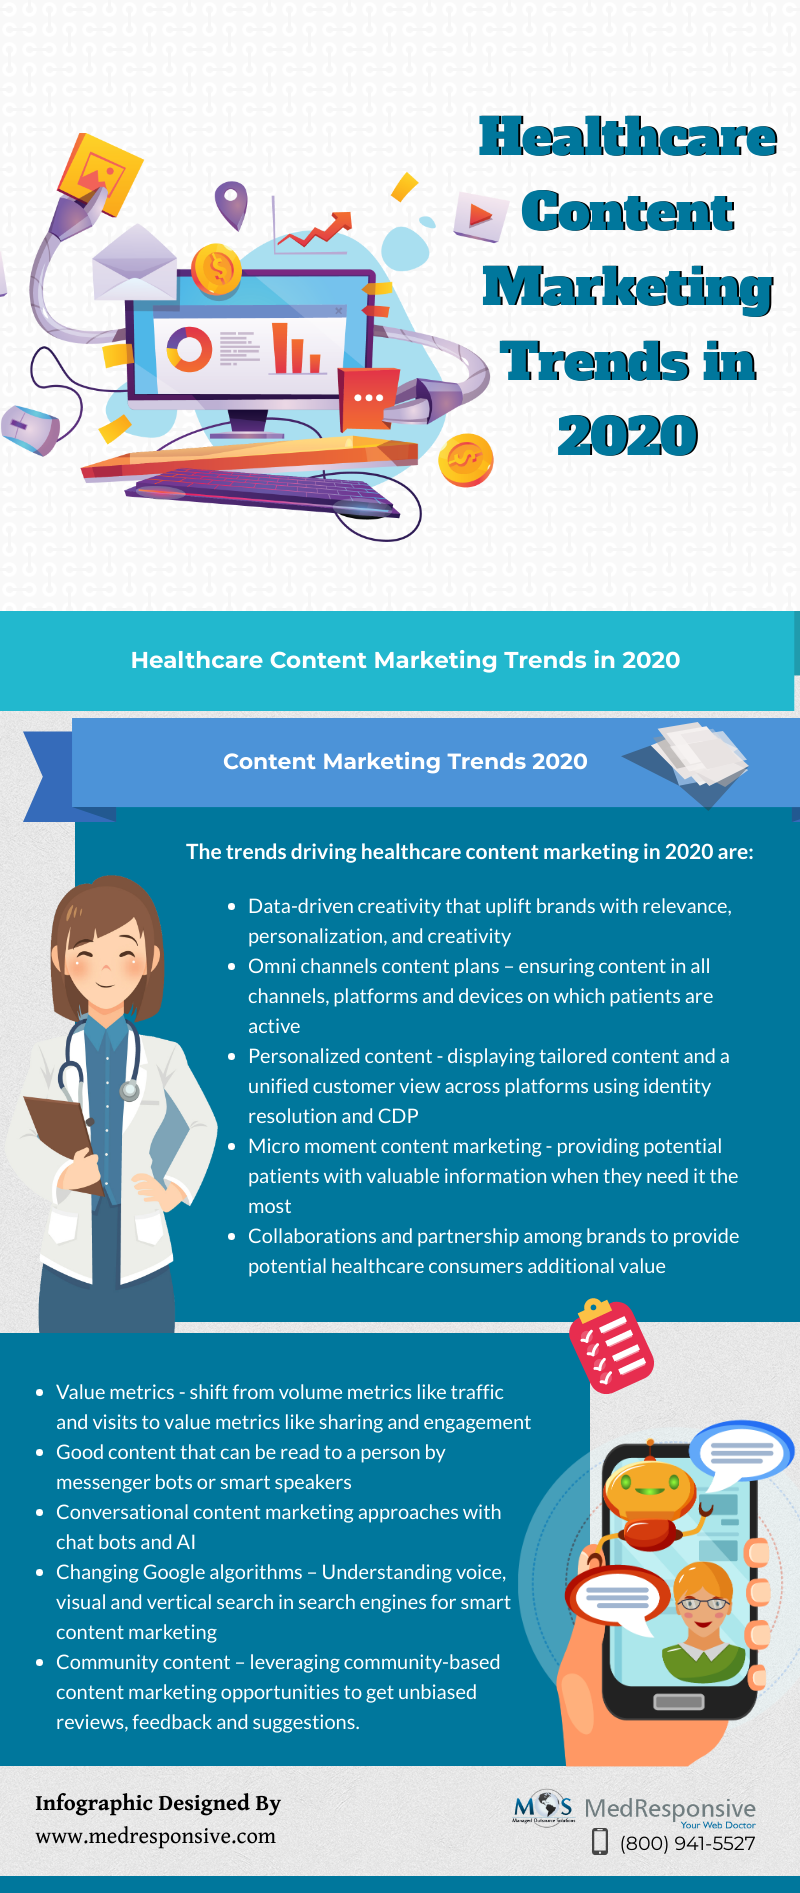 Healthcare Content Marketing Trends in 2020